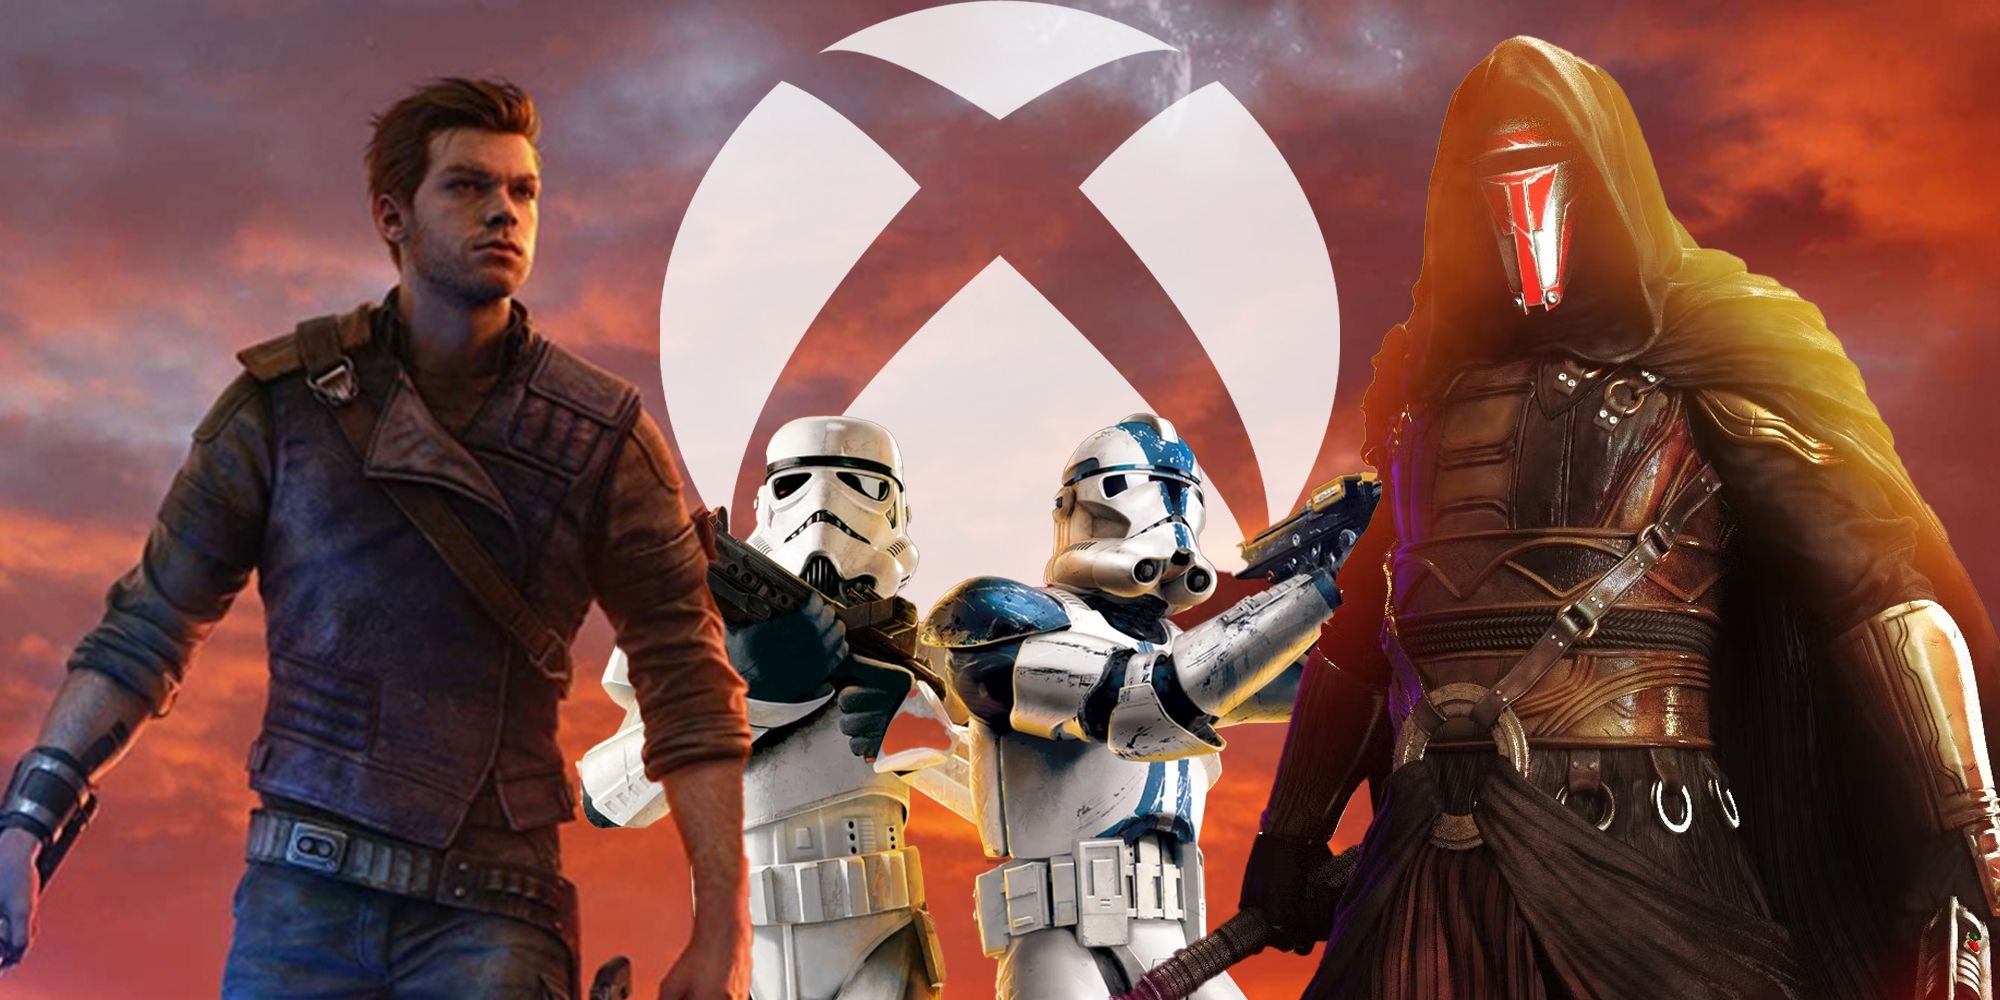 Cal Kestis from Jedi Survivor, Stormtroopers from the Battlefront Collection, and Darth Revan from KOTOR with the Xbox logo behind them